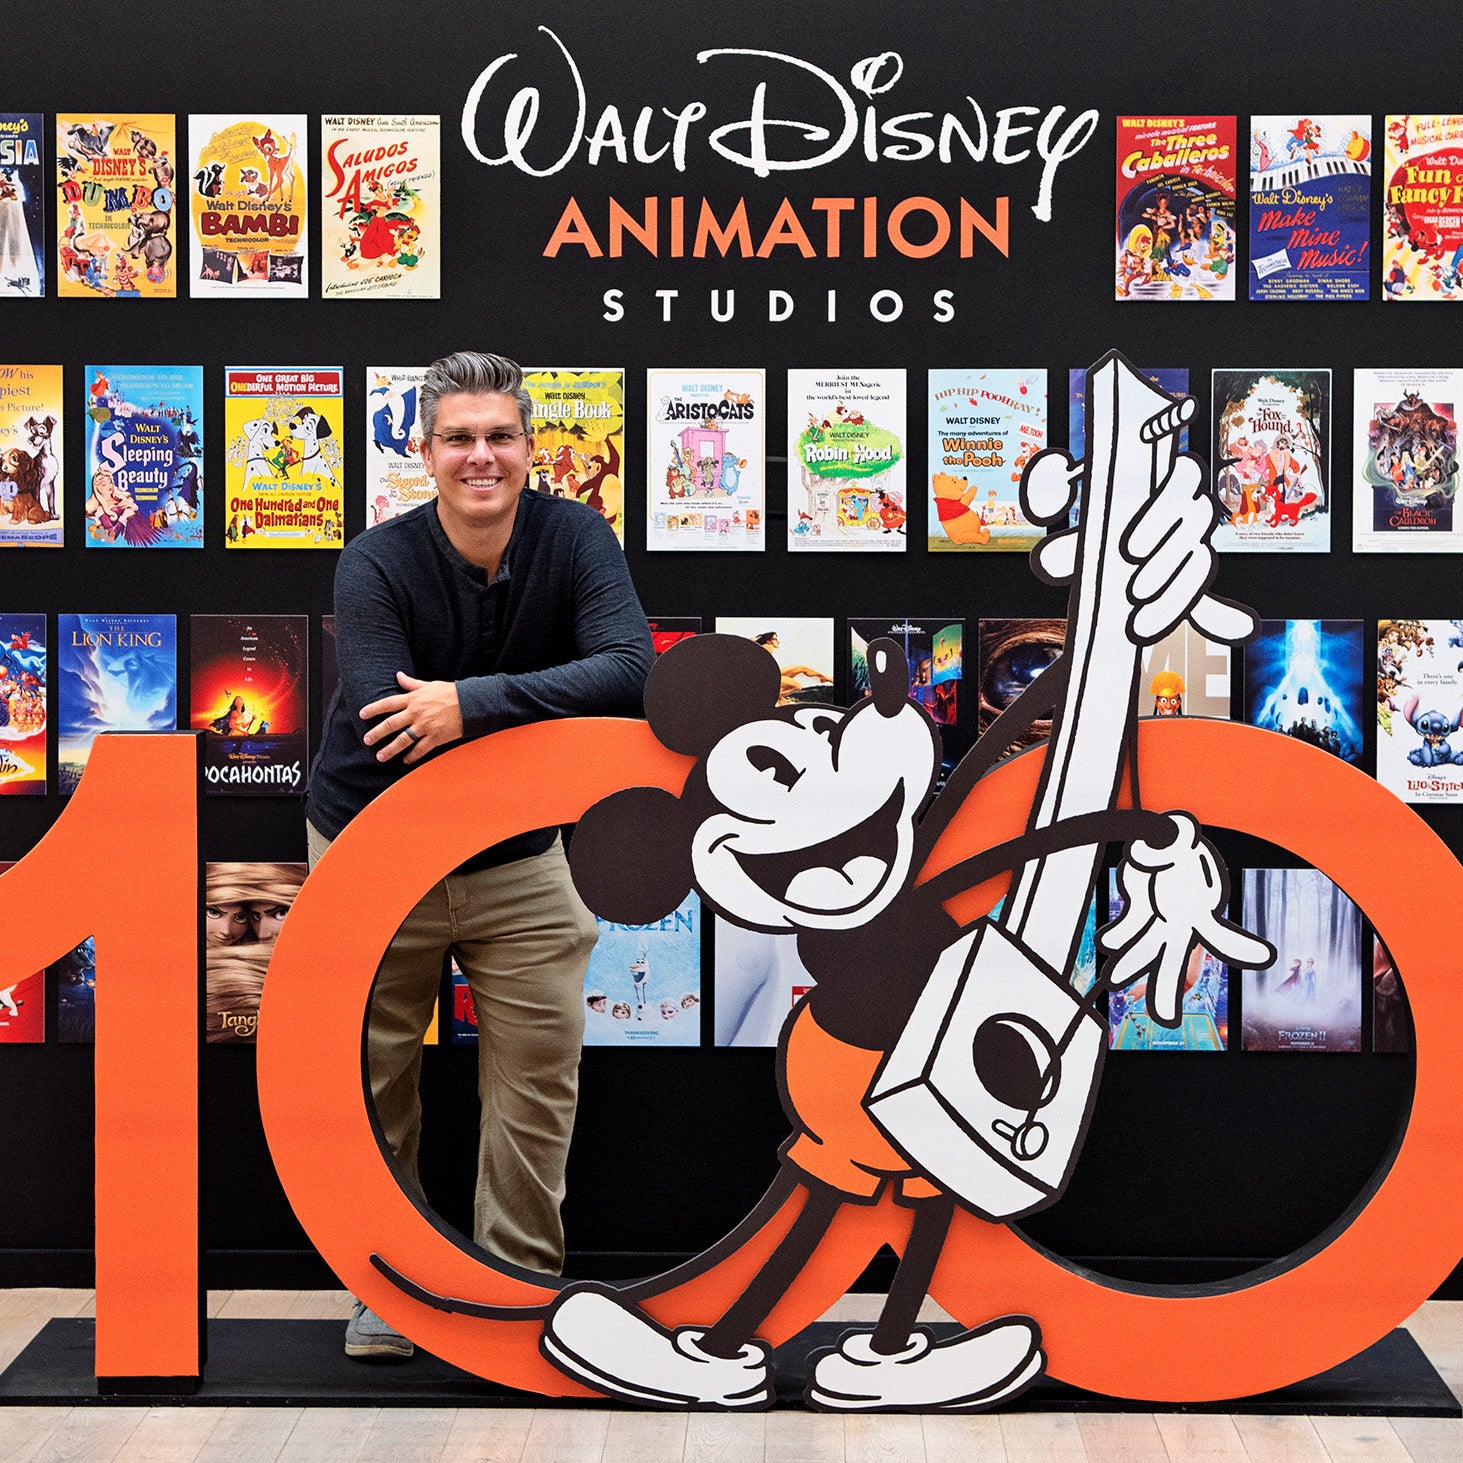 Greg Culp leaning against Mickey Mouse sign in Disney Animation Studios